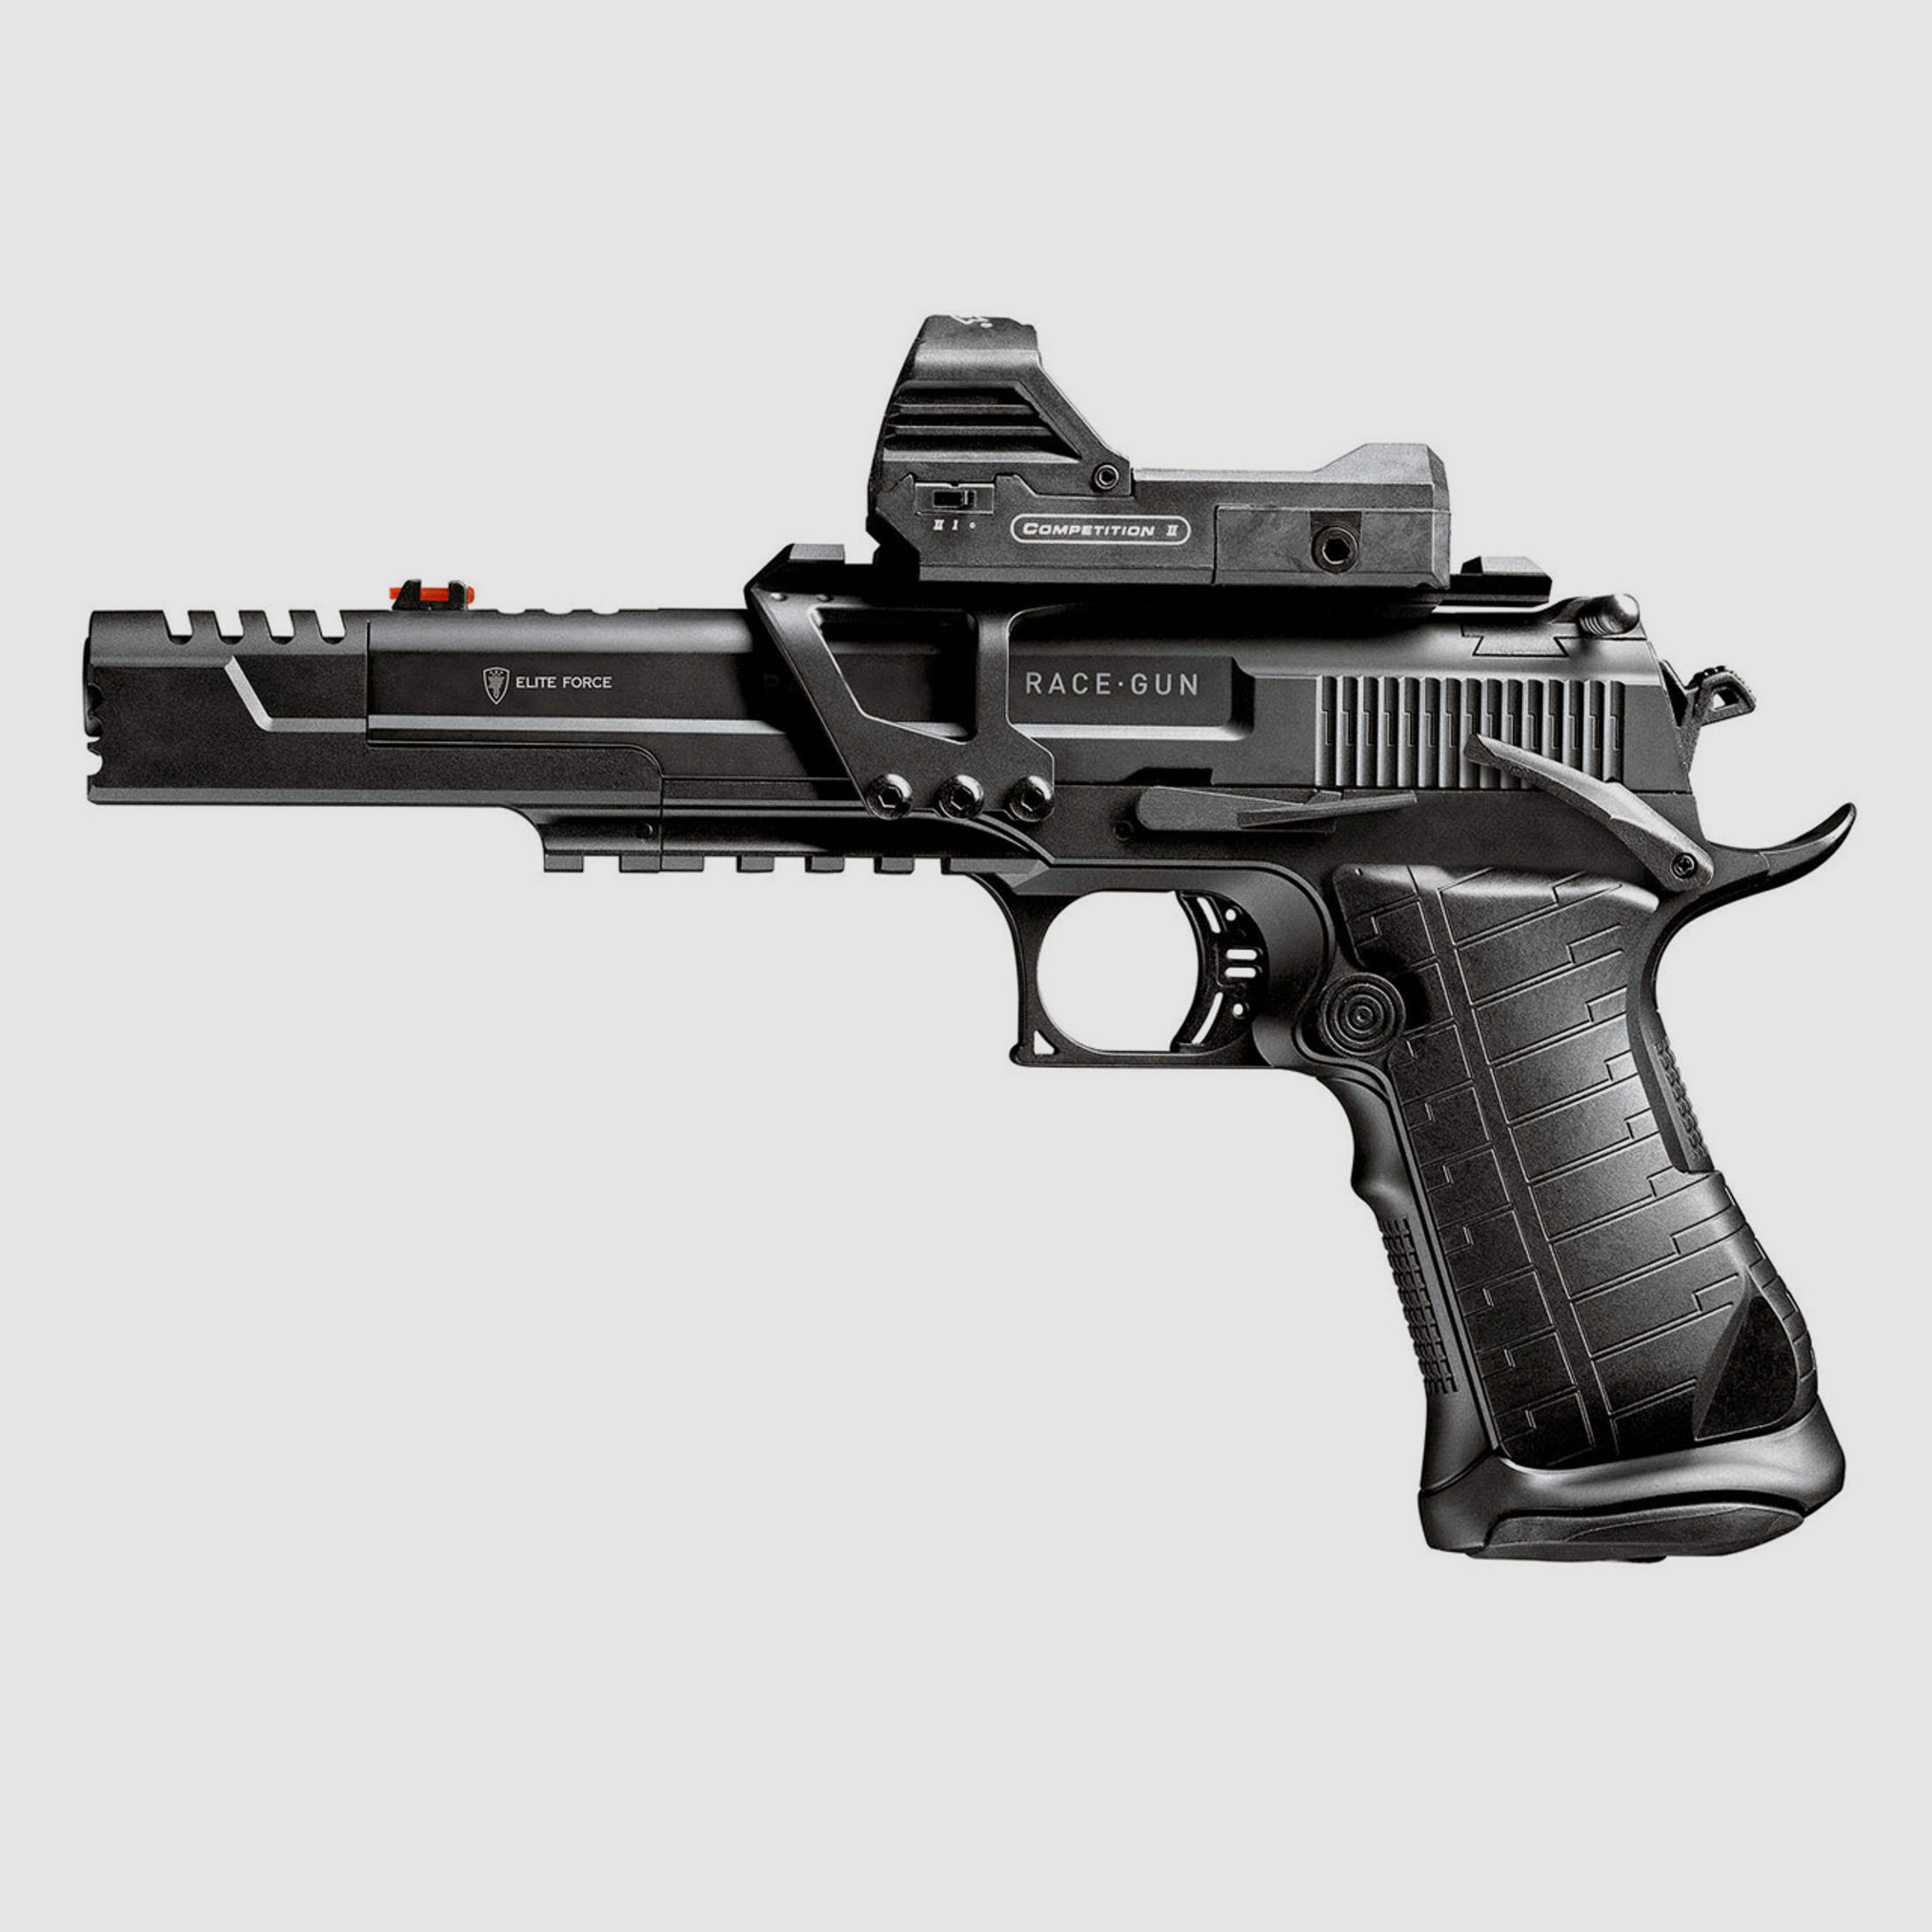 Softair CO2 Pistole Elite Force RaceGun Blowback Kaliber 6 mm BB (P18)  + Red Dot Walther Competition III